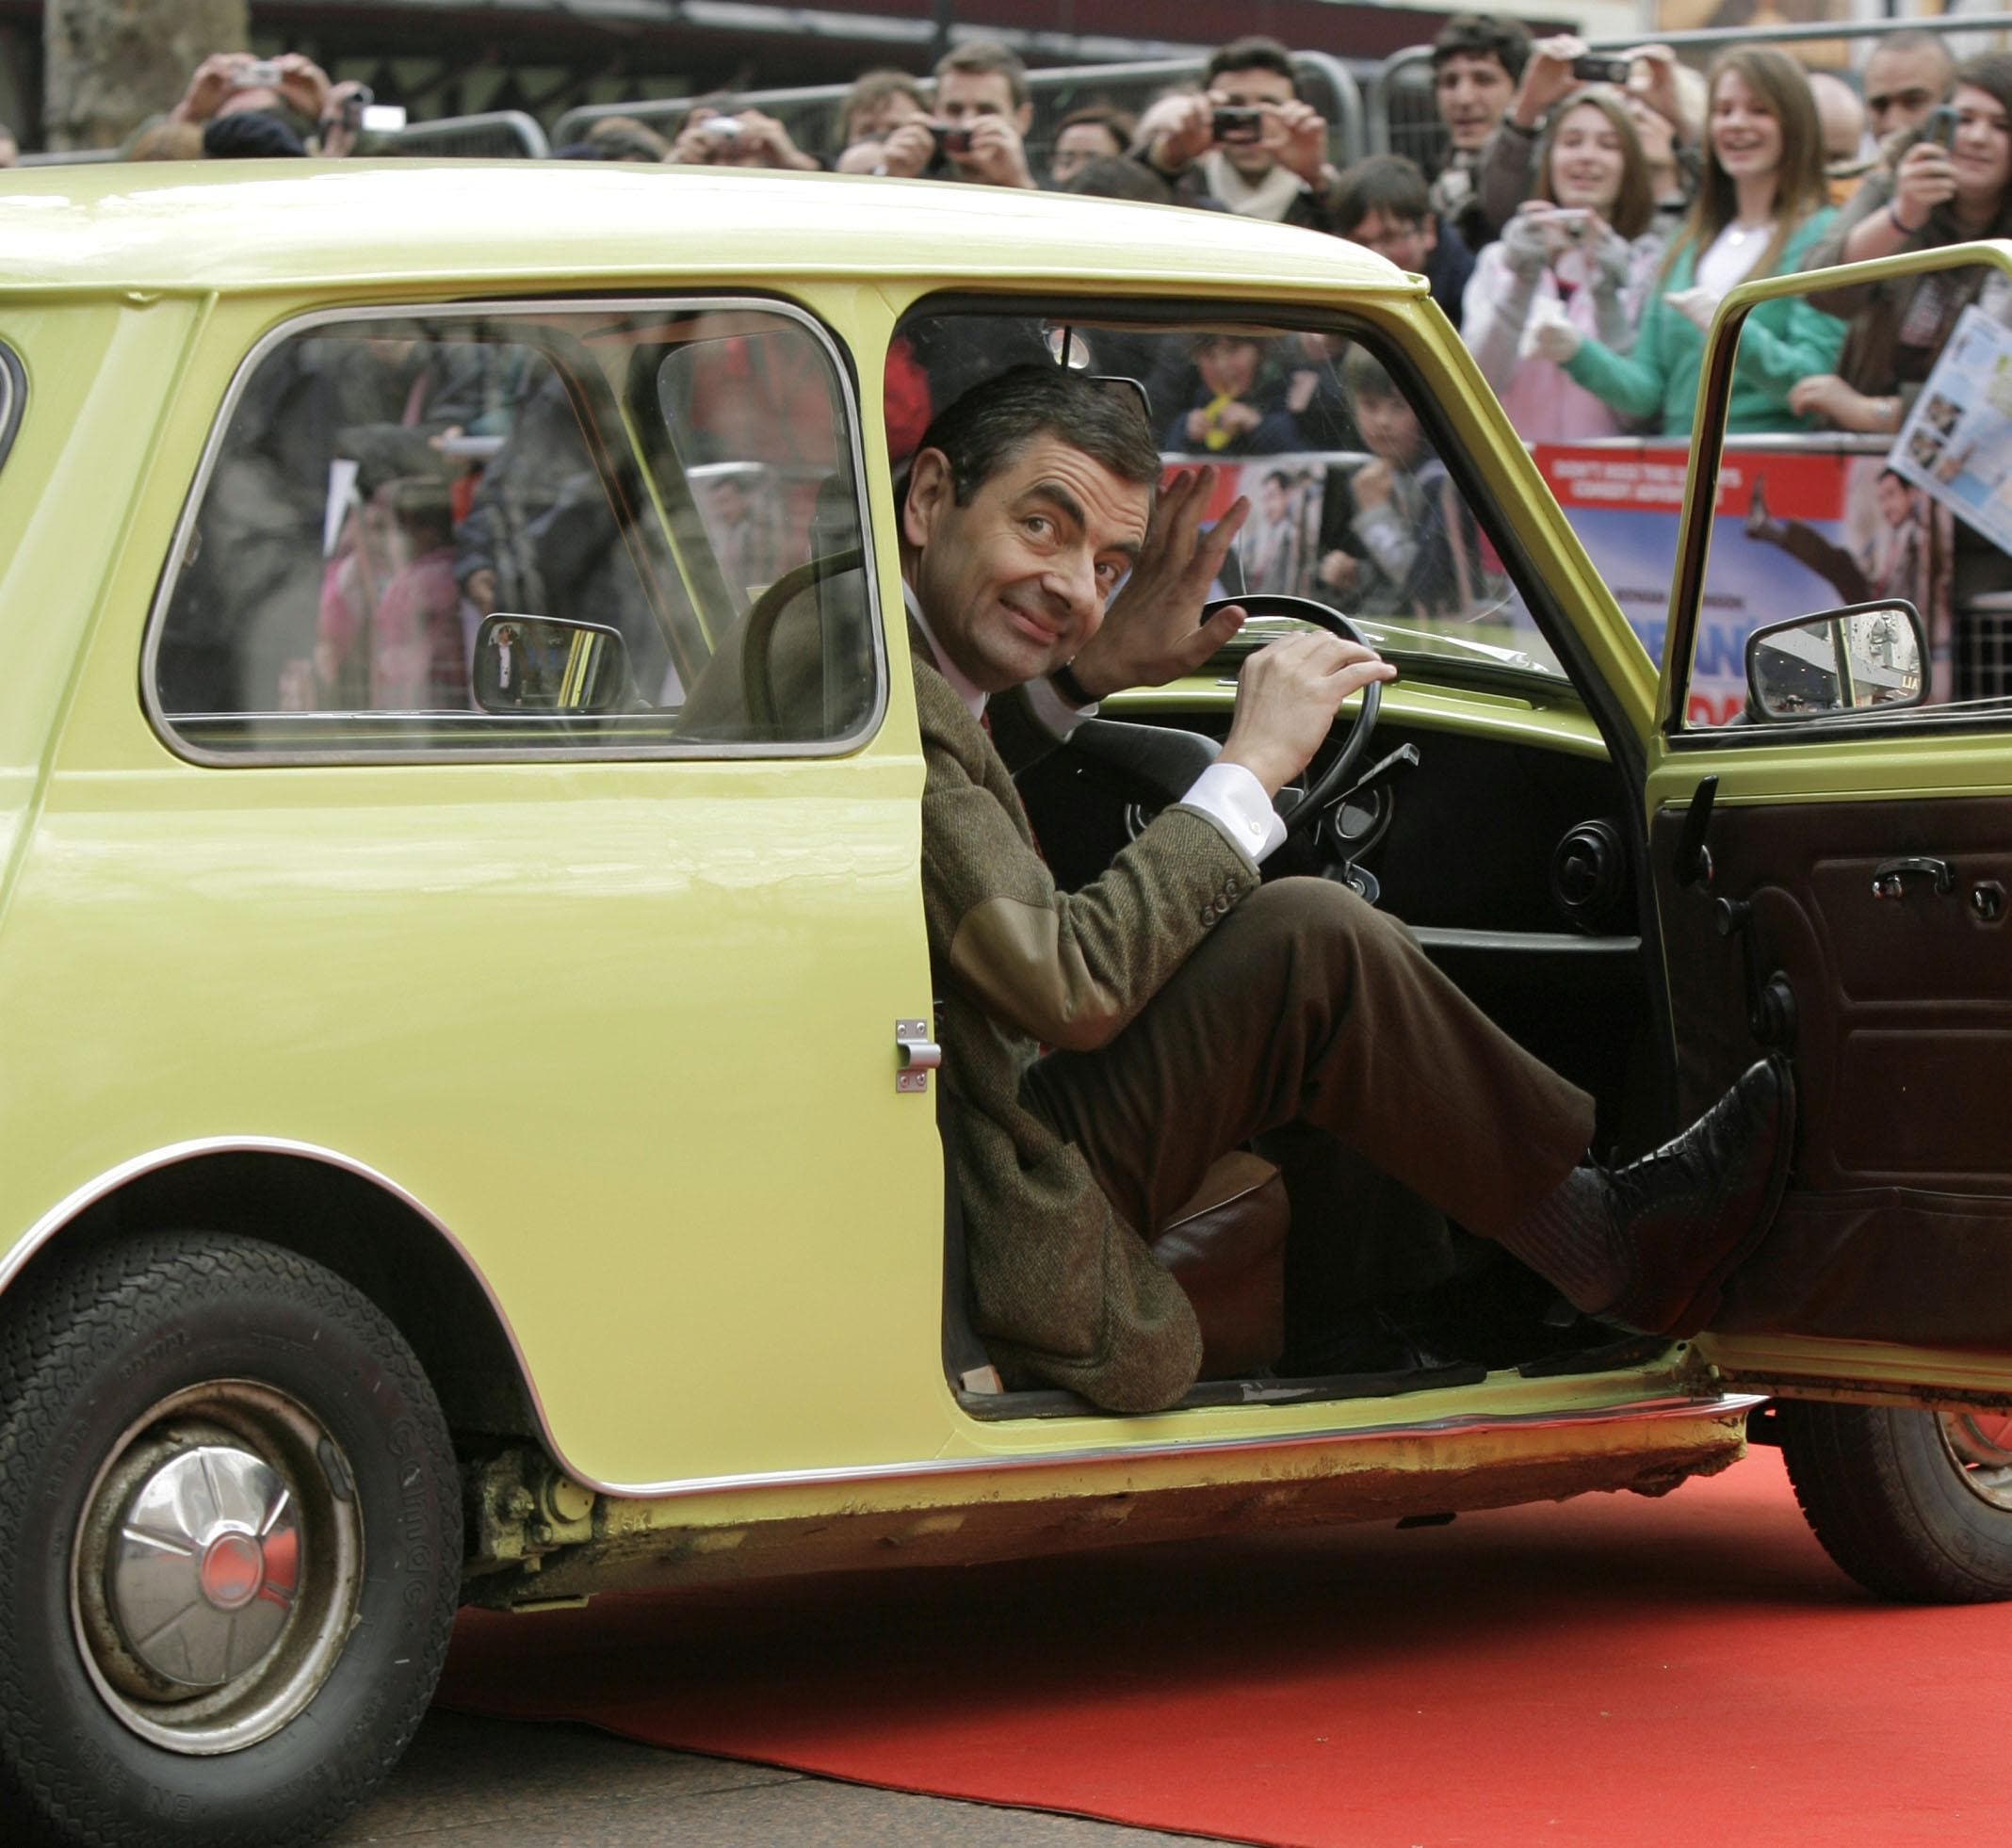 lamtac discover mr bean s iconic million classic mini that has been associated with the childhoods of millions of people around the world 655cc319ebc07 Discover Mr. Bean's Iconic $101 Million Classic Mini 1000 That Has Been Associated With The Childhoods Of Millions Of People Around The World.